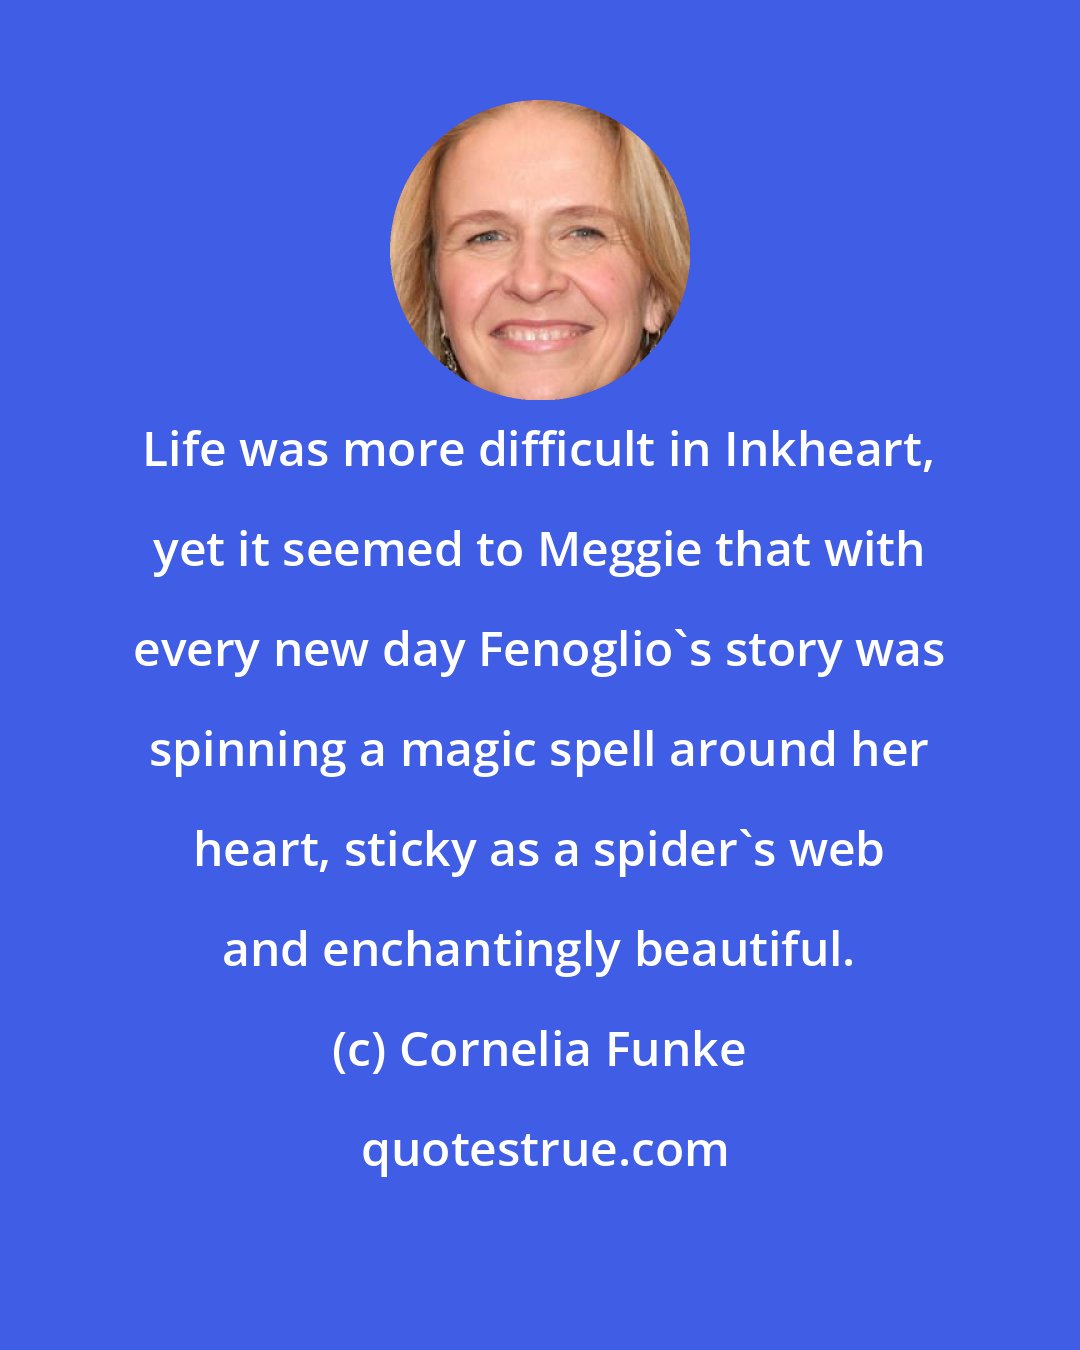 Cornelia Funke: Life was more difficult in Inkheart, yet it seemed to Meggie that with every new day Fenoglio's story was spinning a magic spell around her heart, sticky as a spider's web and enchantingly beautiful.